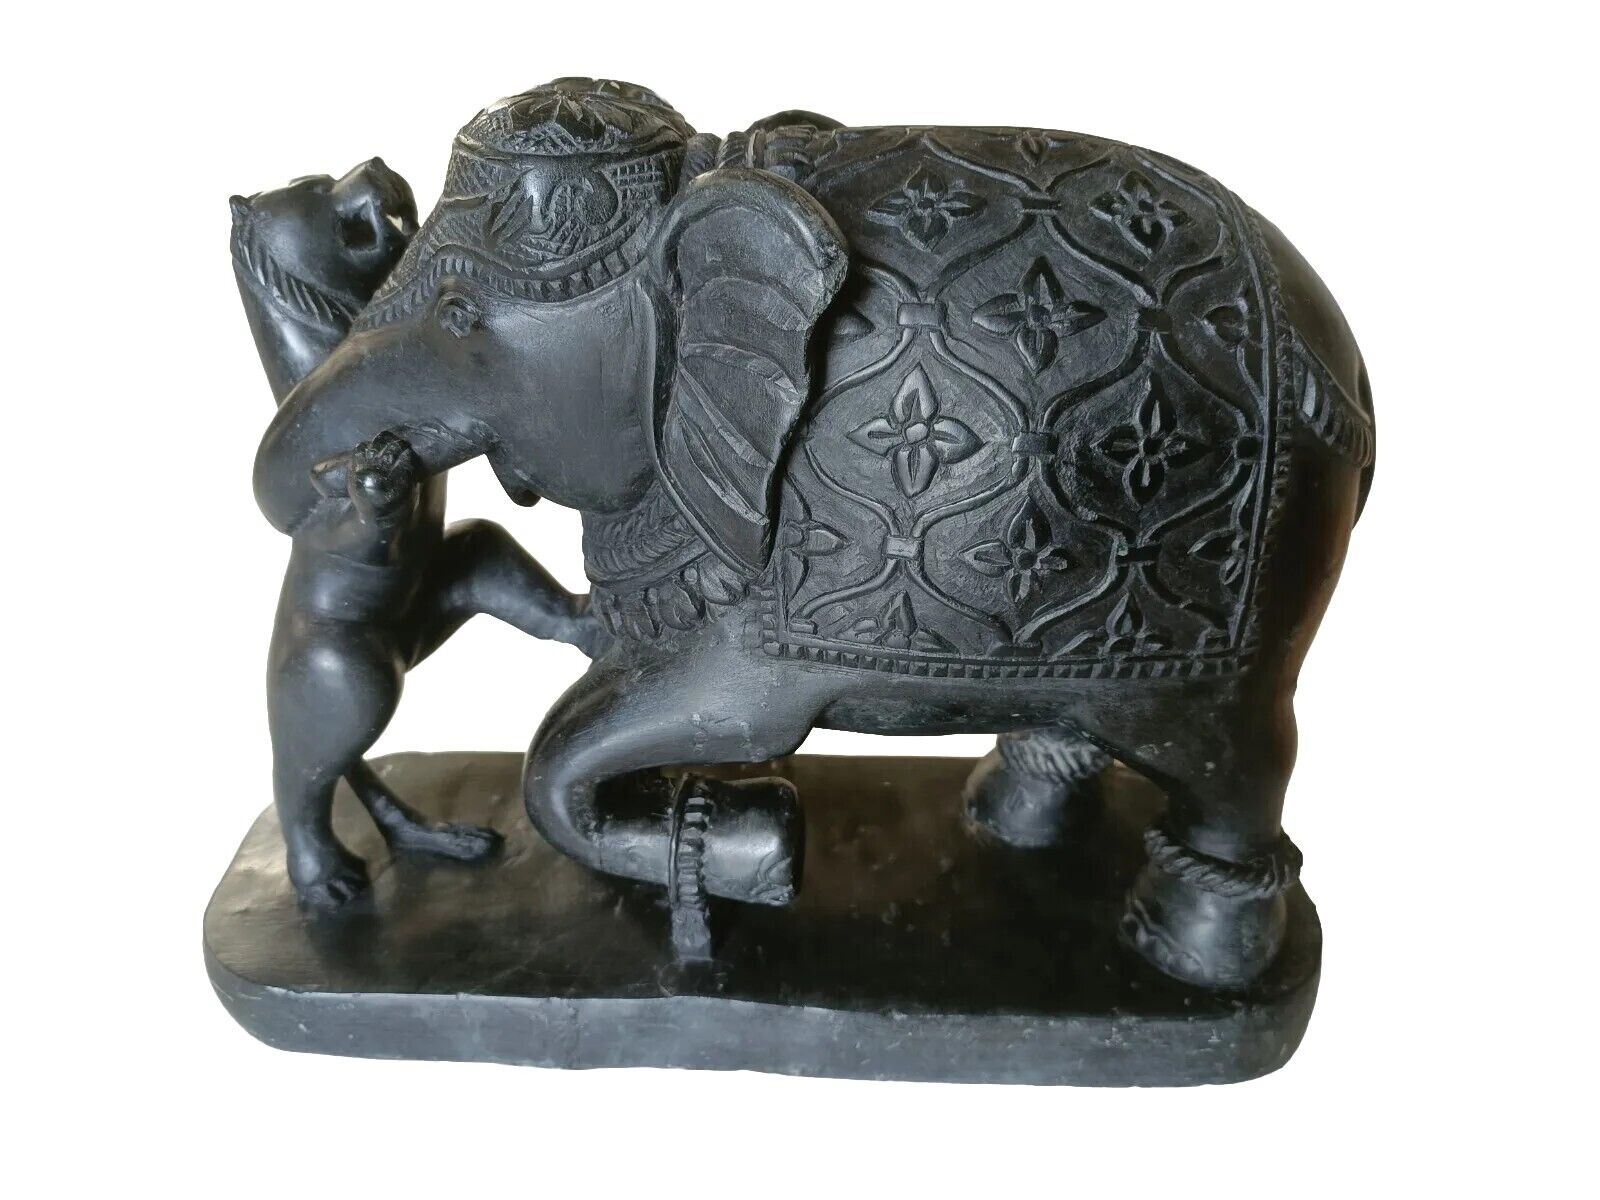 Beautiful Handcrafted Handmade Carved Black Elephant Stone Statue, Sculpture 